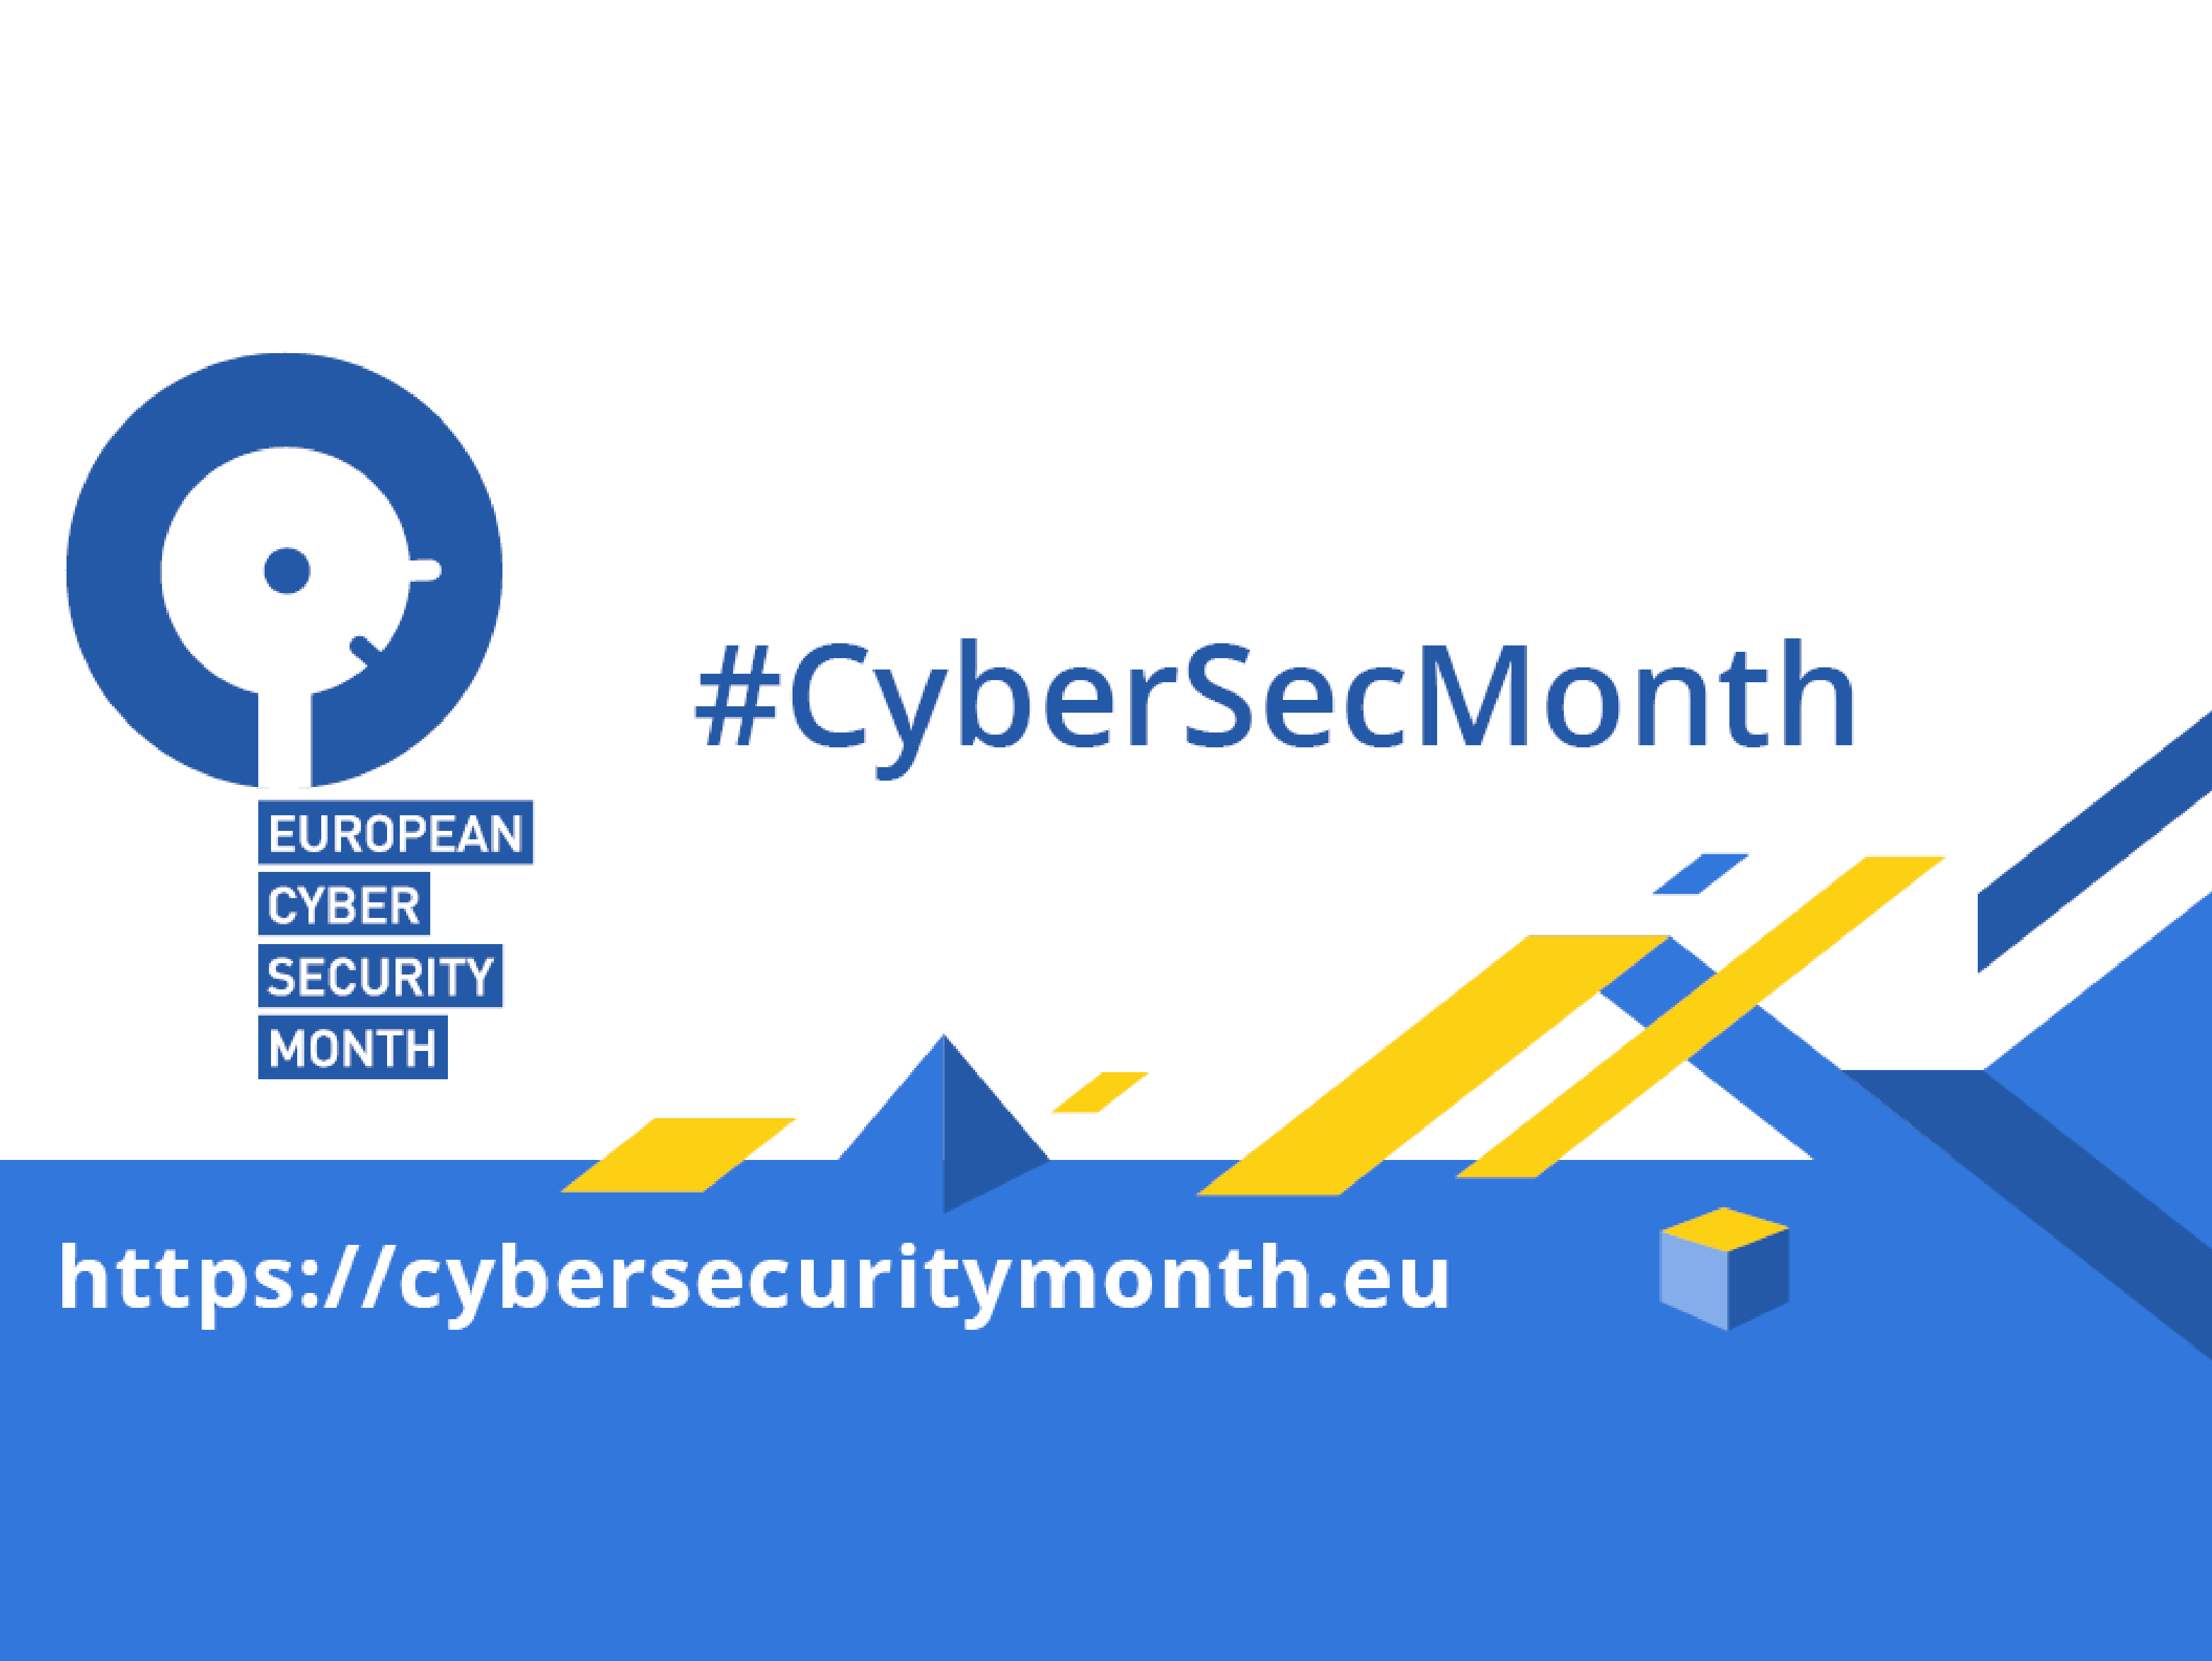 Cybersecurity month